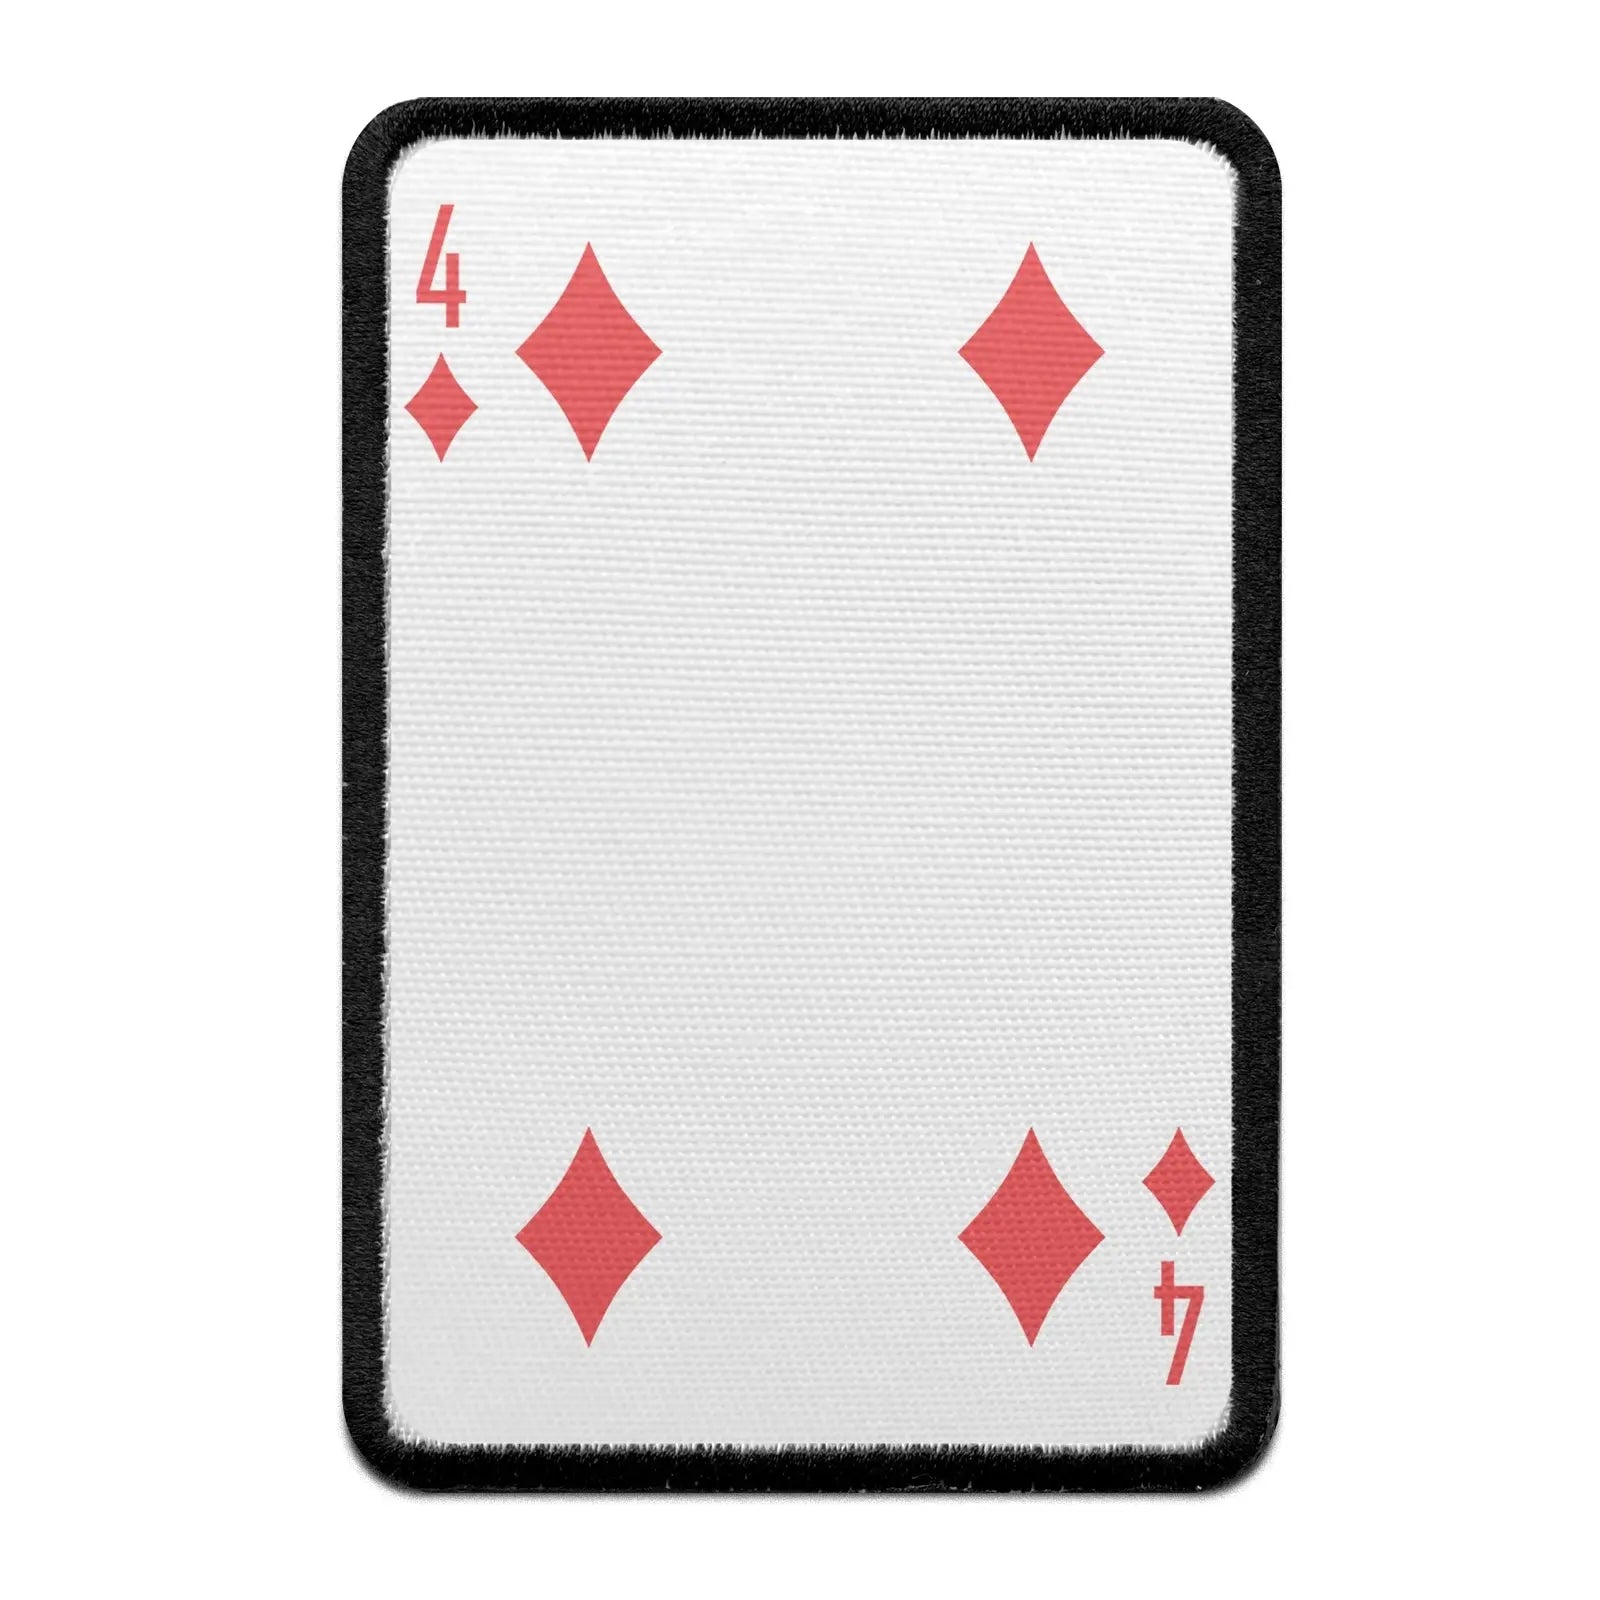 Four Of Diamonds Card FotoPatch Game Deck Embroidered Iron On 